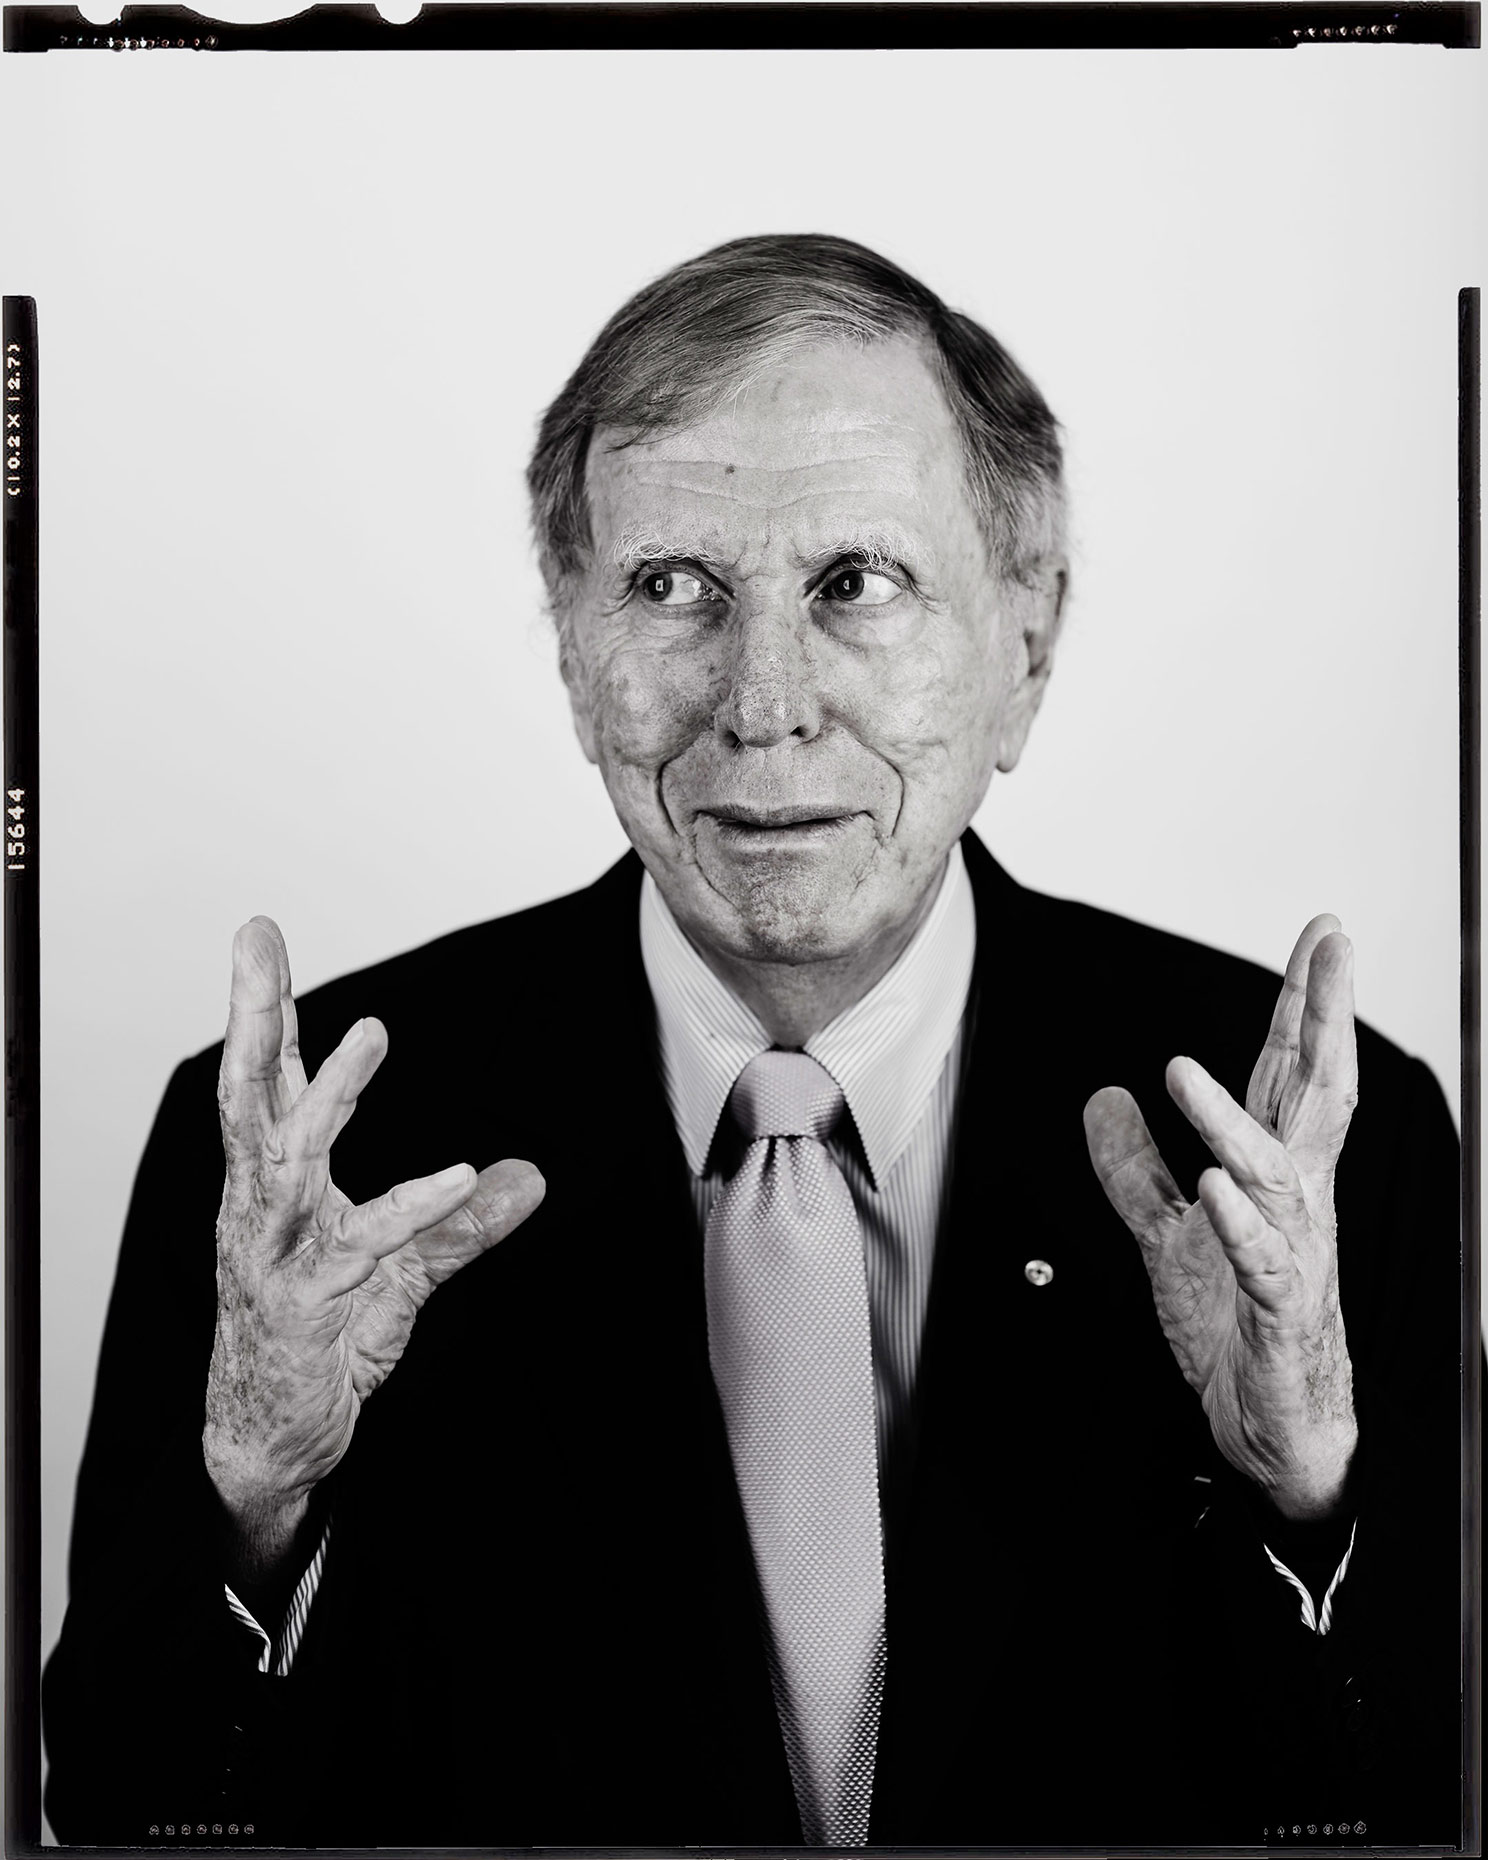 Melbourne corporate portrait photographer James Braund captures The Honourable Michael Kirby AC CMG 